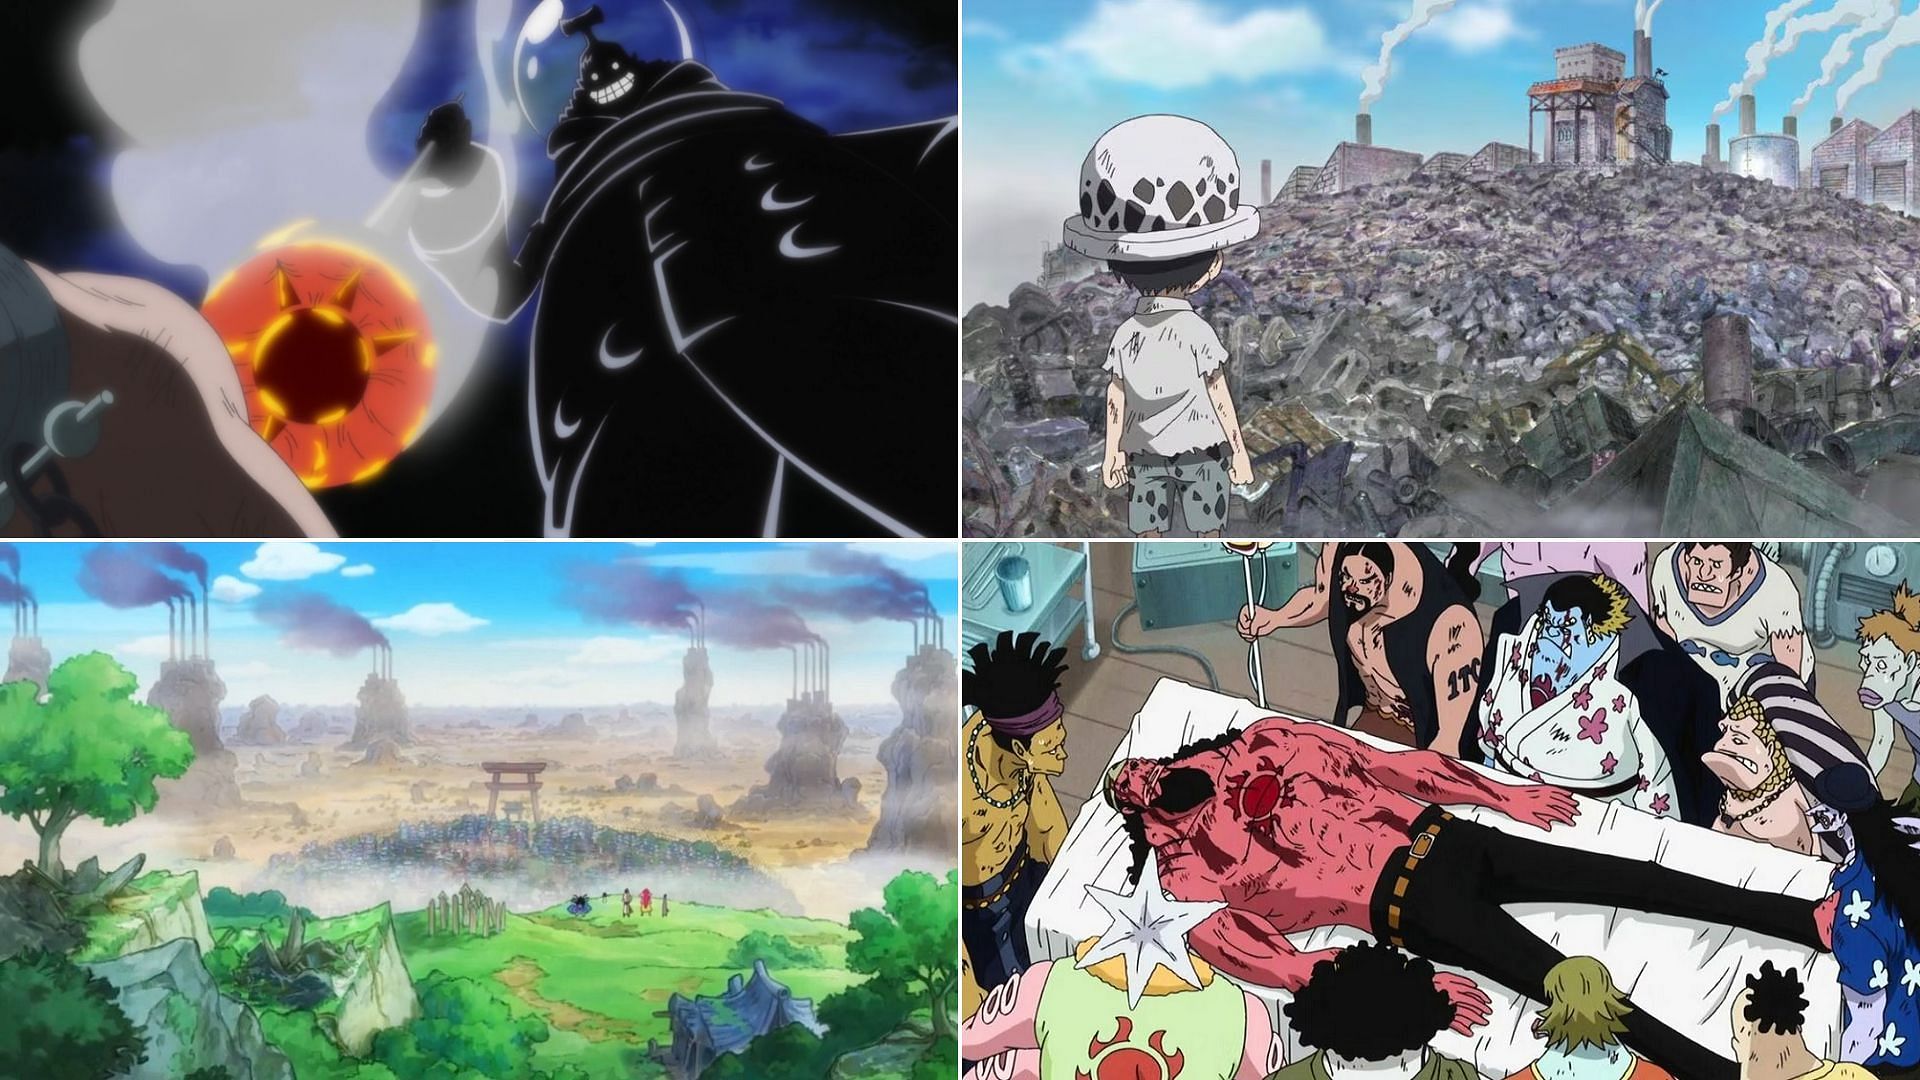 Beyond straightforward violence or sadness, One Piece features some really dark moments, based on real-life issues (Image via Toei Animation, One Piece)